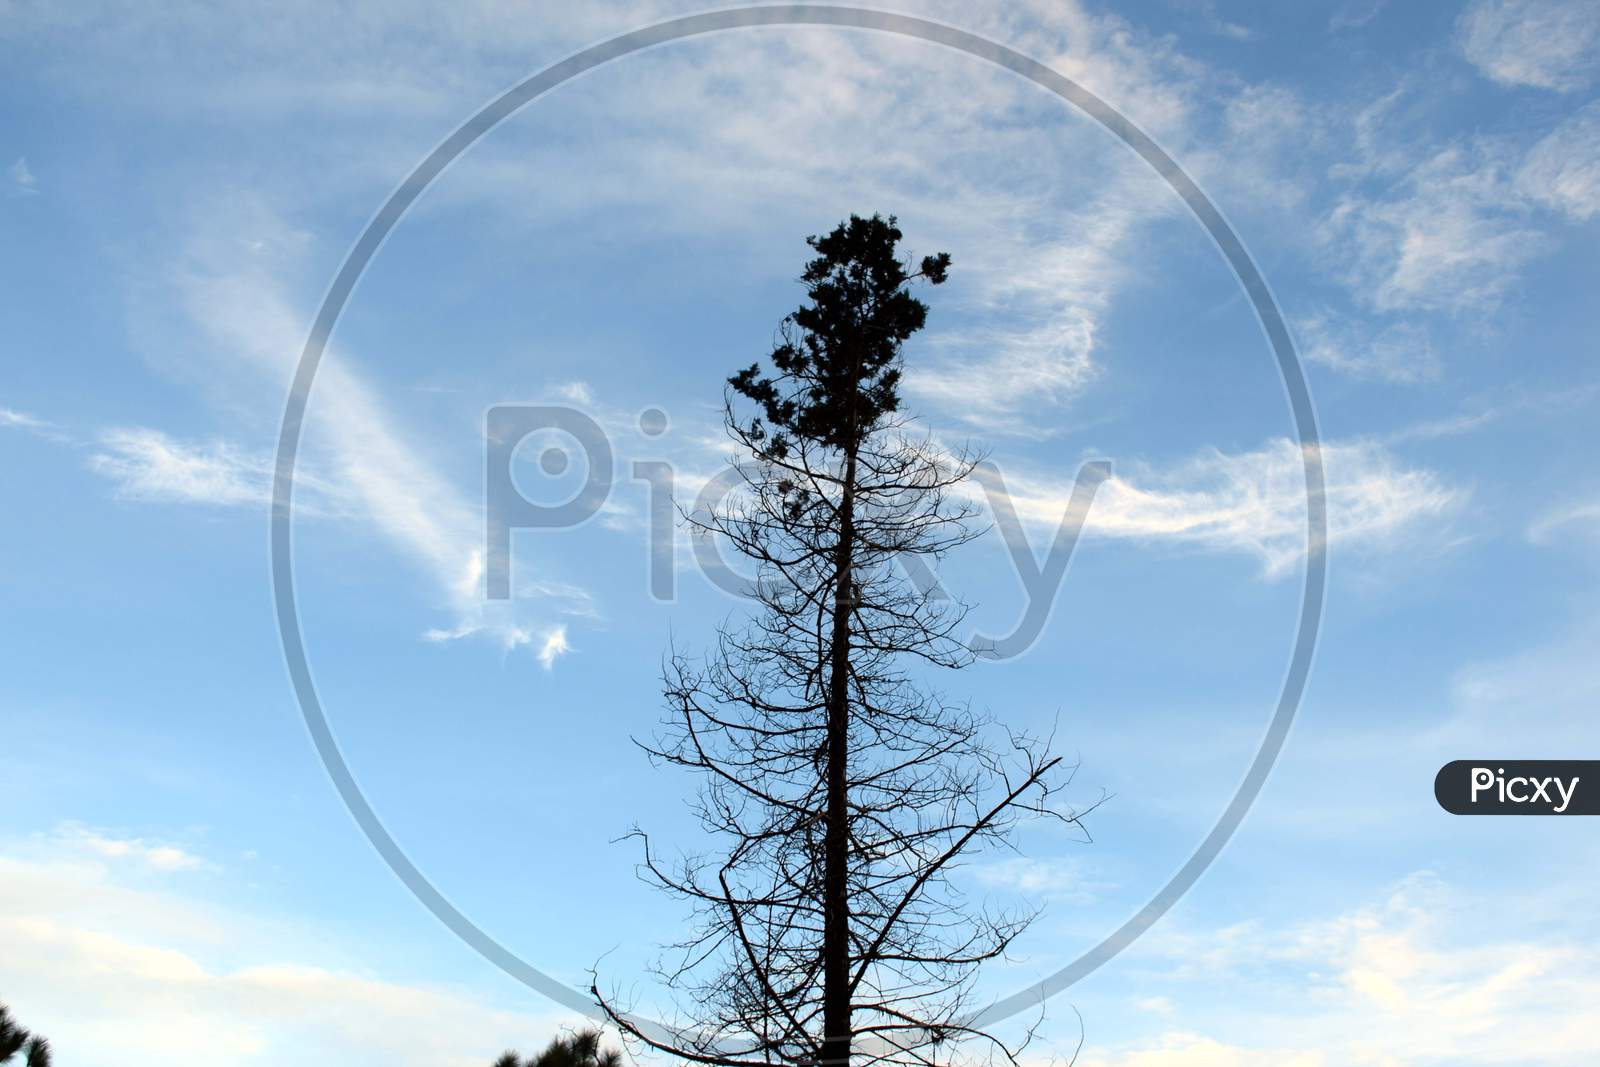 Beautiful Picture Of Tree And Blue Sky In Uttarakhand